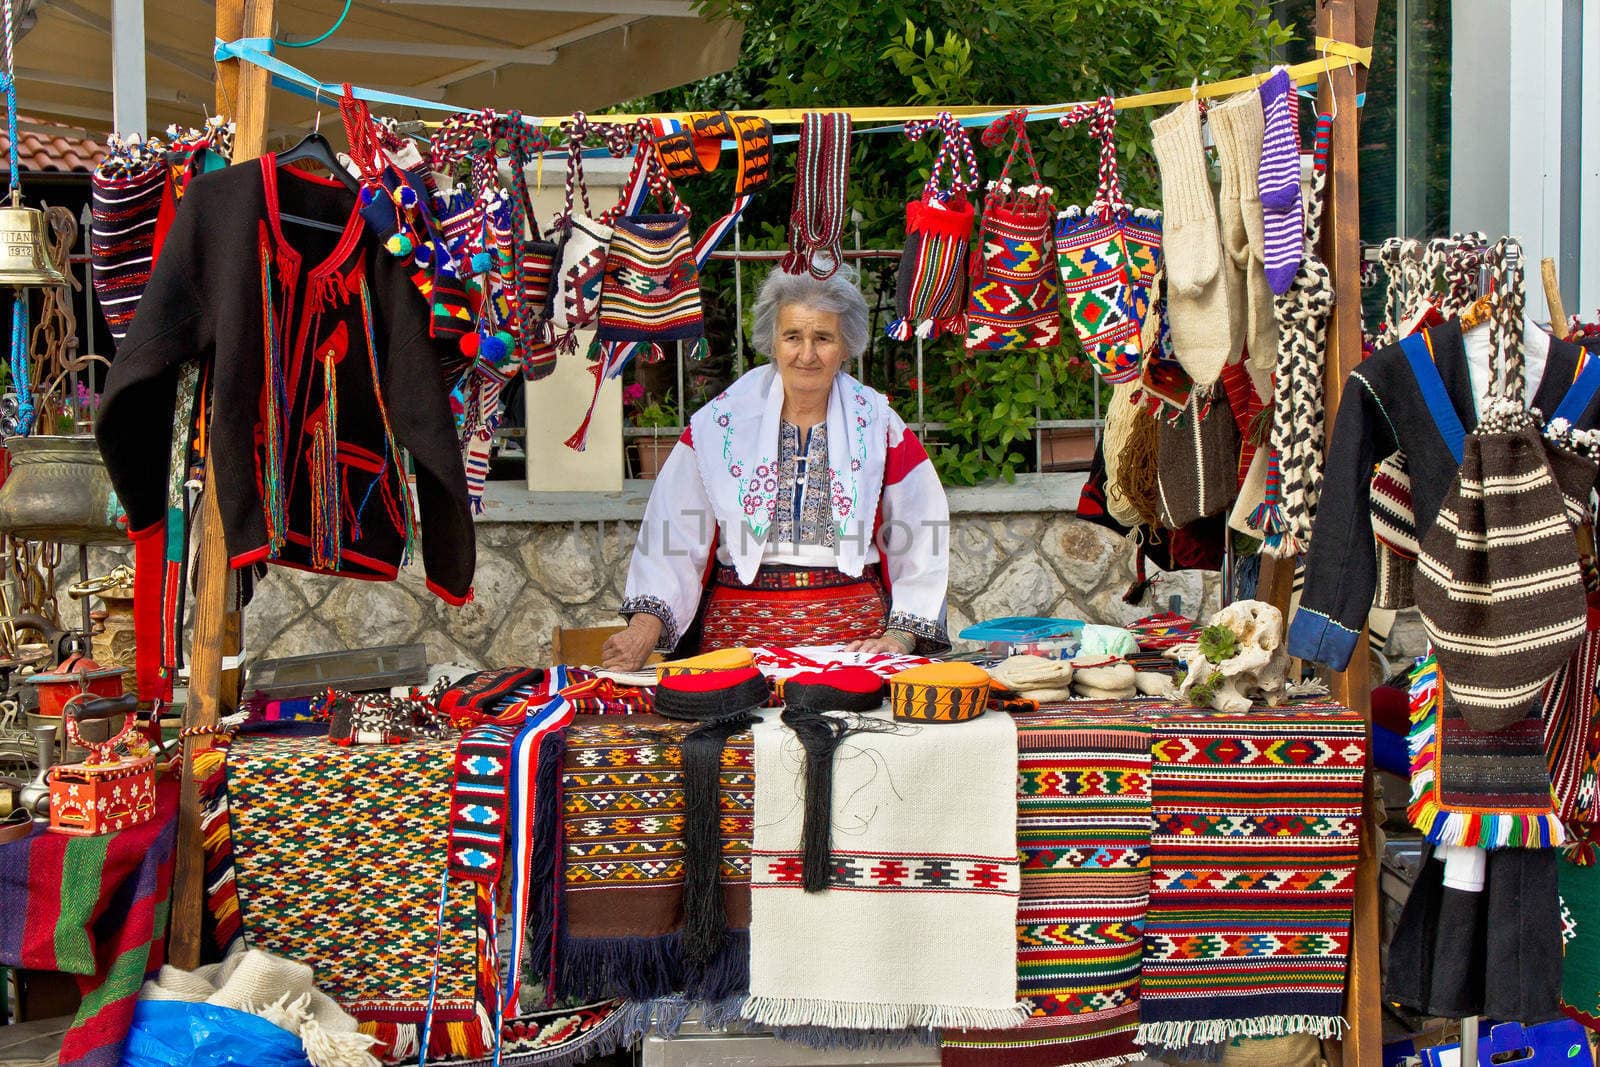 Lady in traditional clothes selling on booth by xbrchx